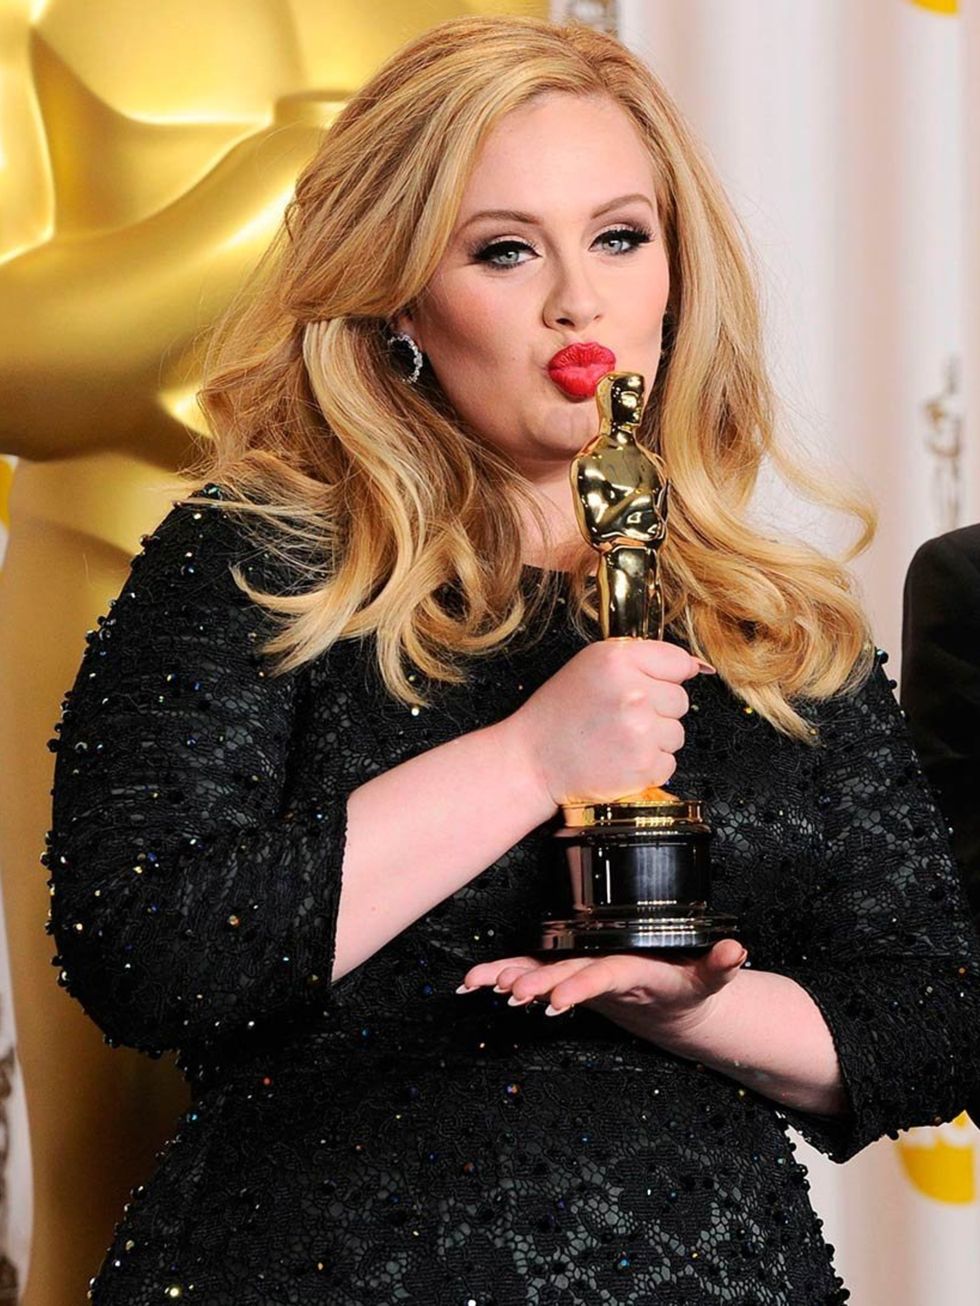 <p><a href="http://www.elleuk.com/star-style/news/adele-ft.-prince-rumours-of-the-potential-pop-collaboration">Adele</a> likes to smother her <a href="http://www.elleuk.com/star-style/red-carpet/elle-fashion-director-picks-top-10-oscar-dresses-2013">Oscar